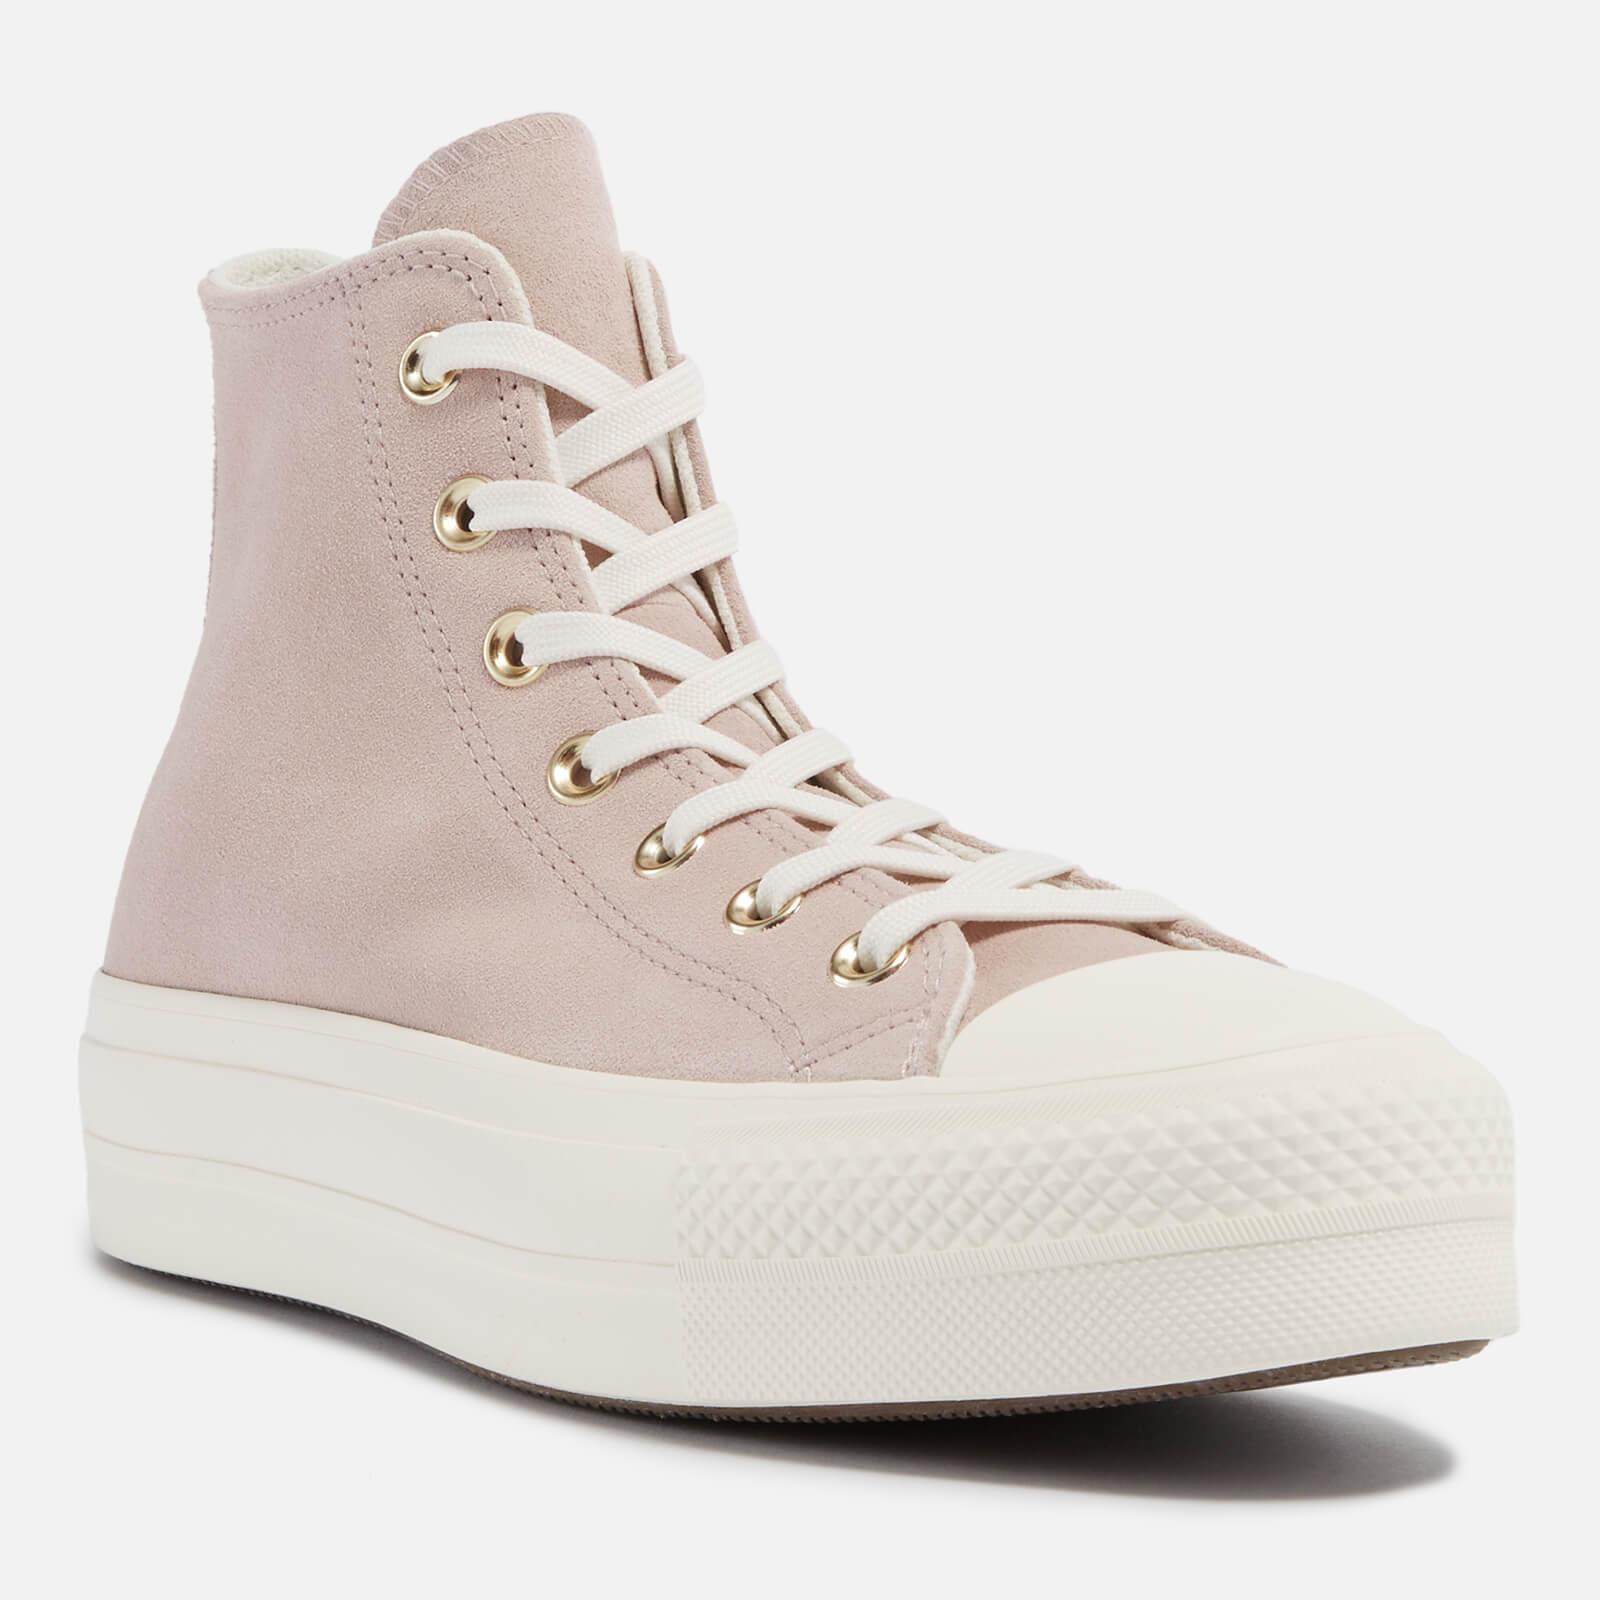 Converse Chuck Taylor All Star Lift Suede Hi-top Trainers in Natural | Lyst